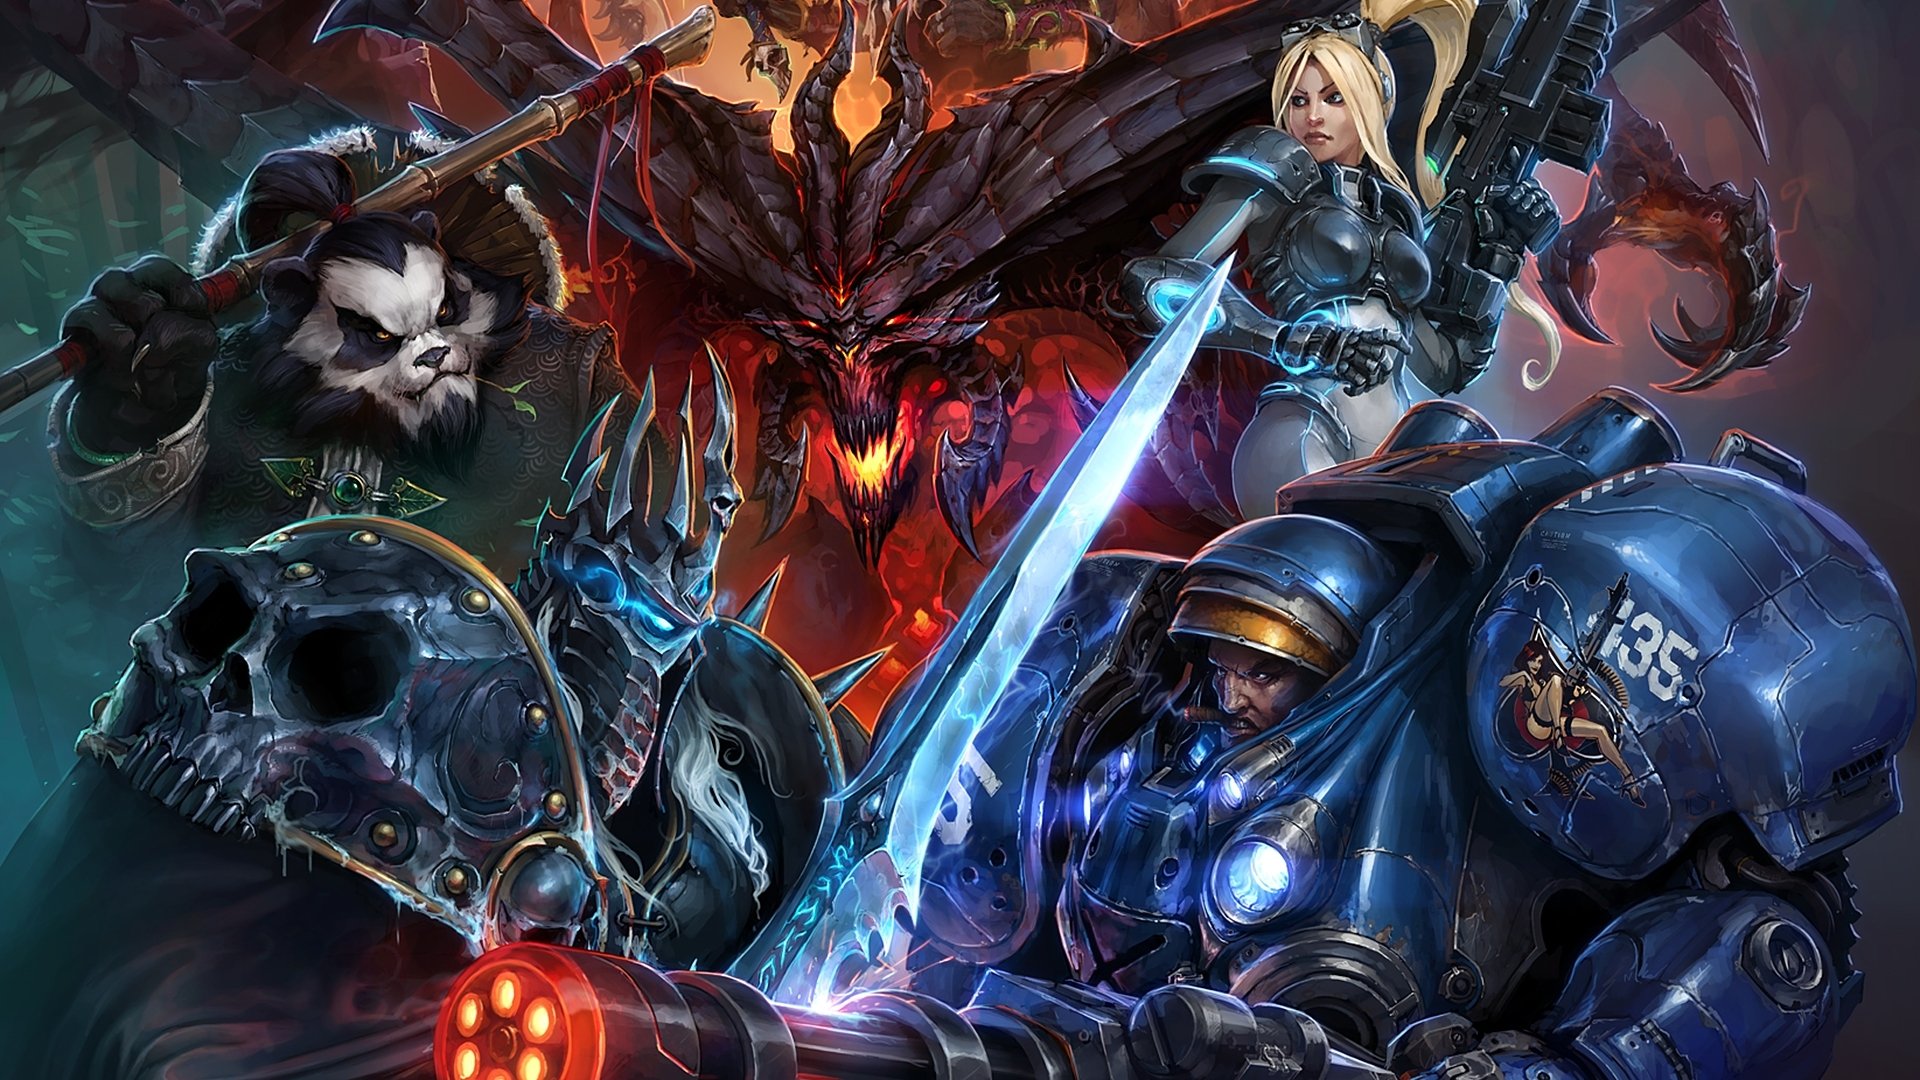 heroes of the storm wallpaper 1920x1080,action adventure game,cg artwork,fictional character,games,pc game